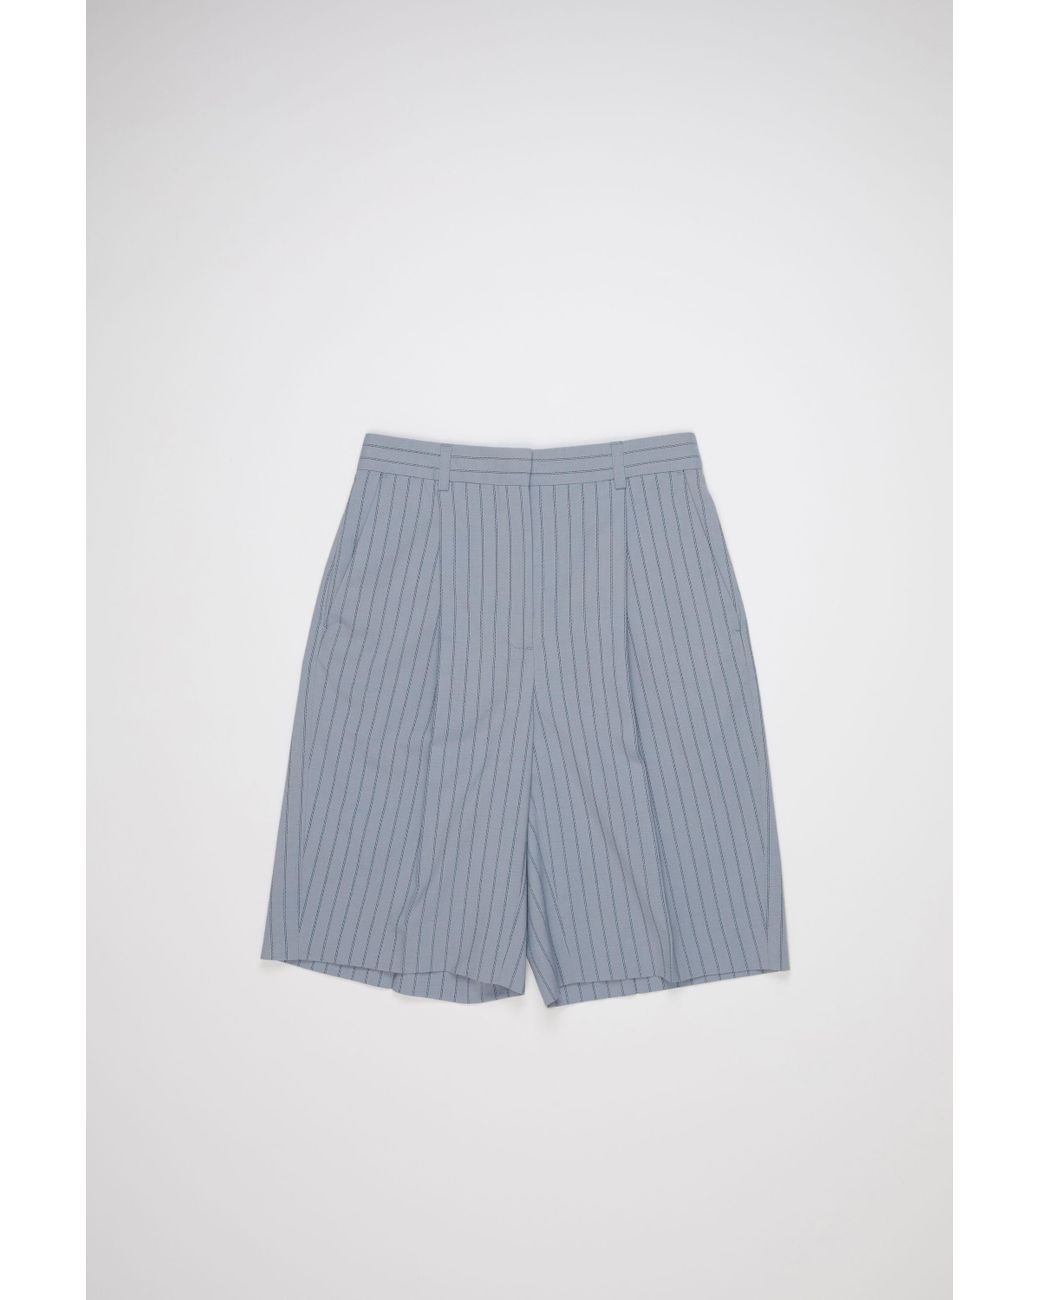 Acne Studios Pinstriped Shorts in Blue | Lyst